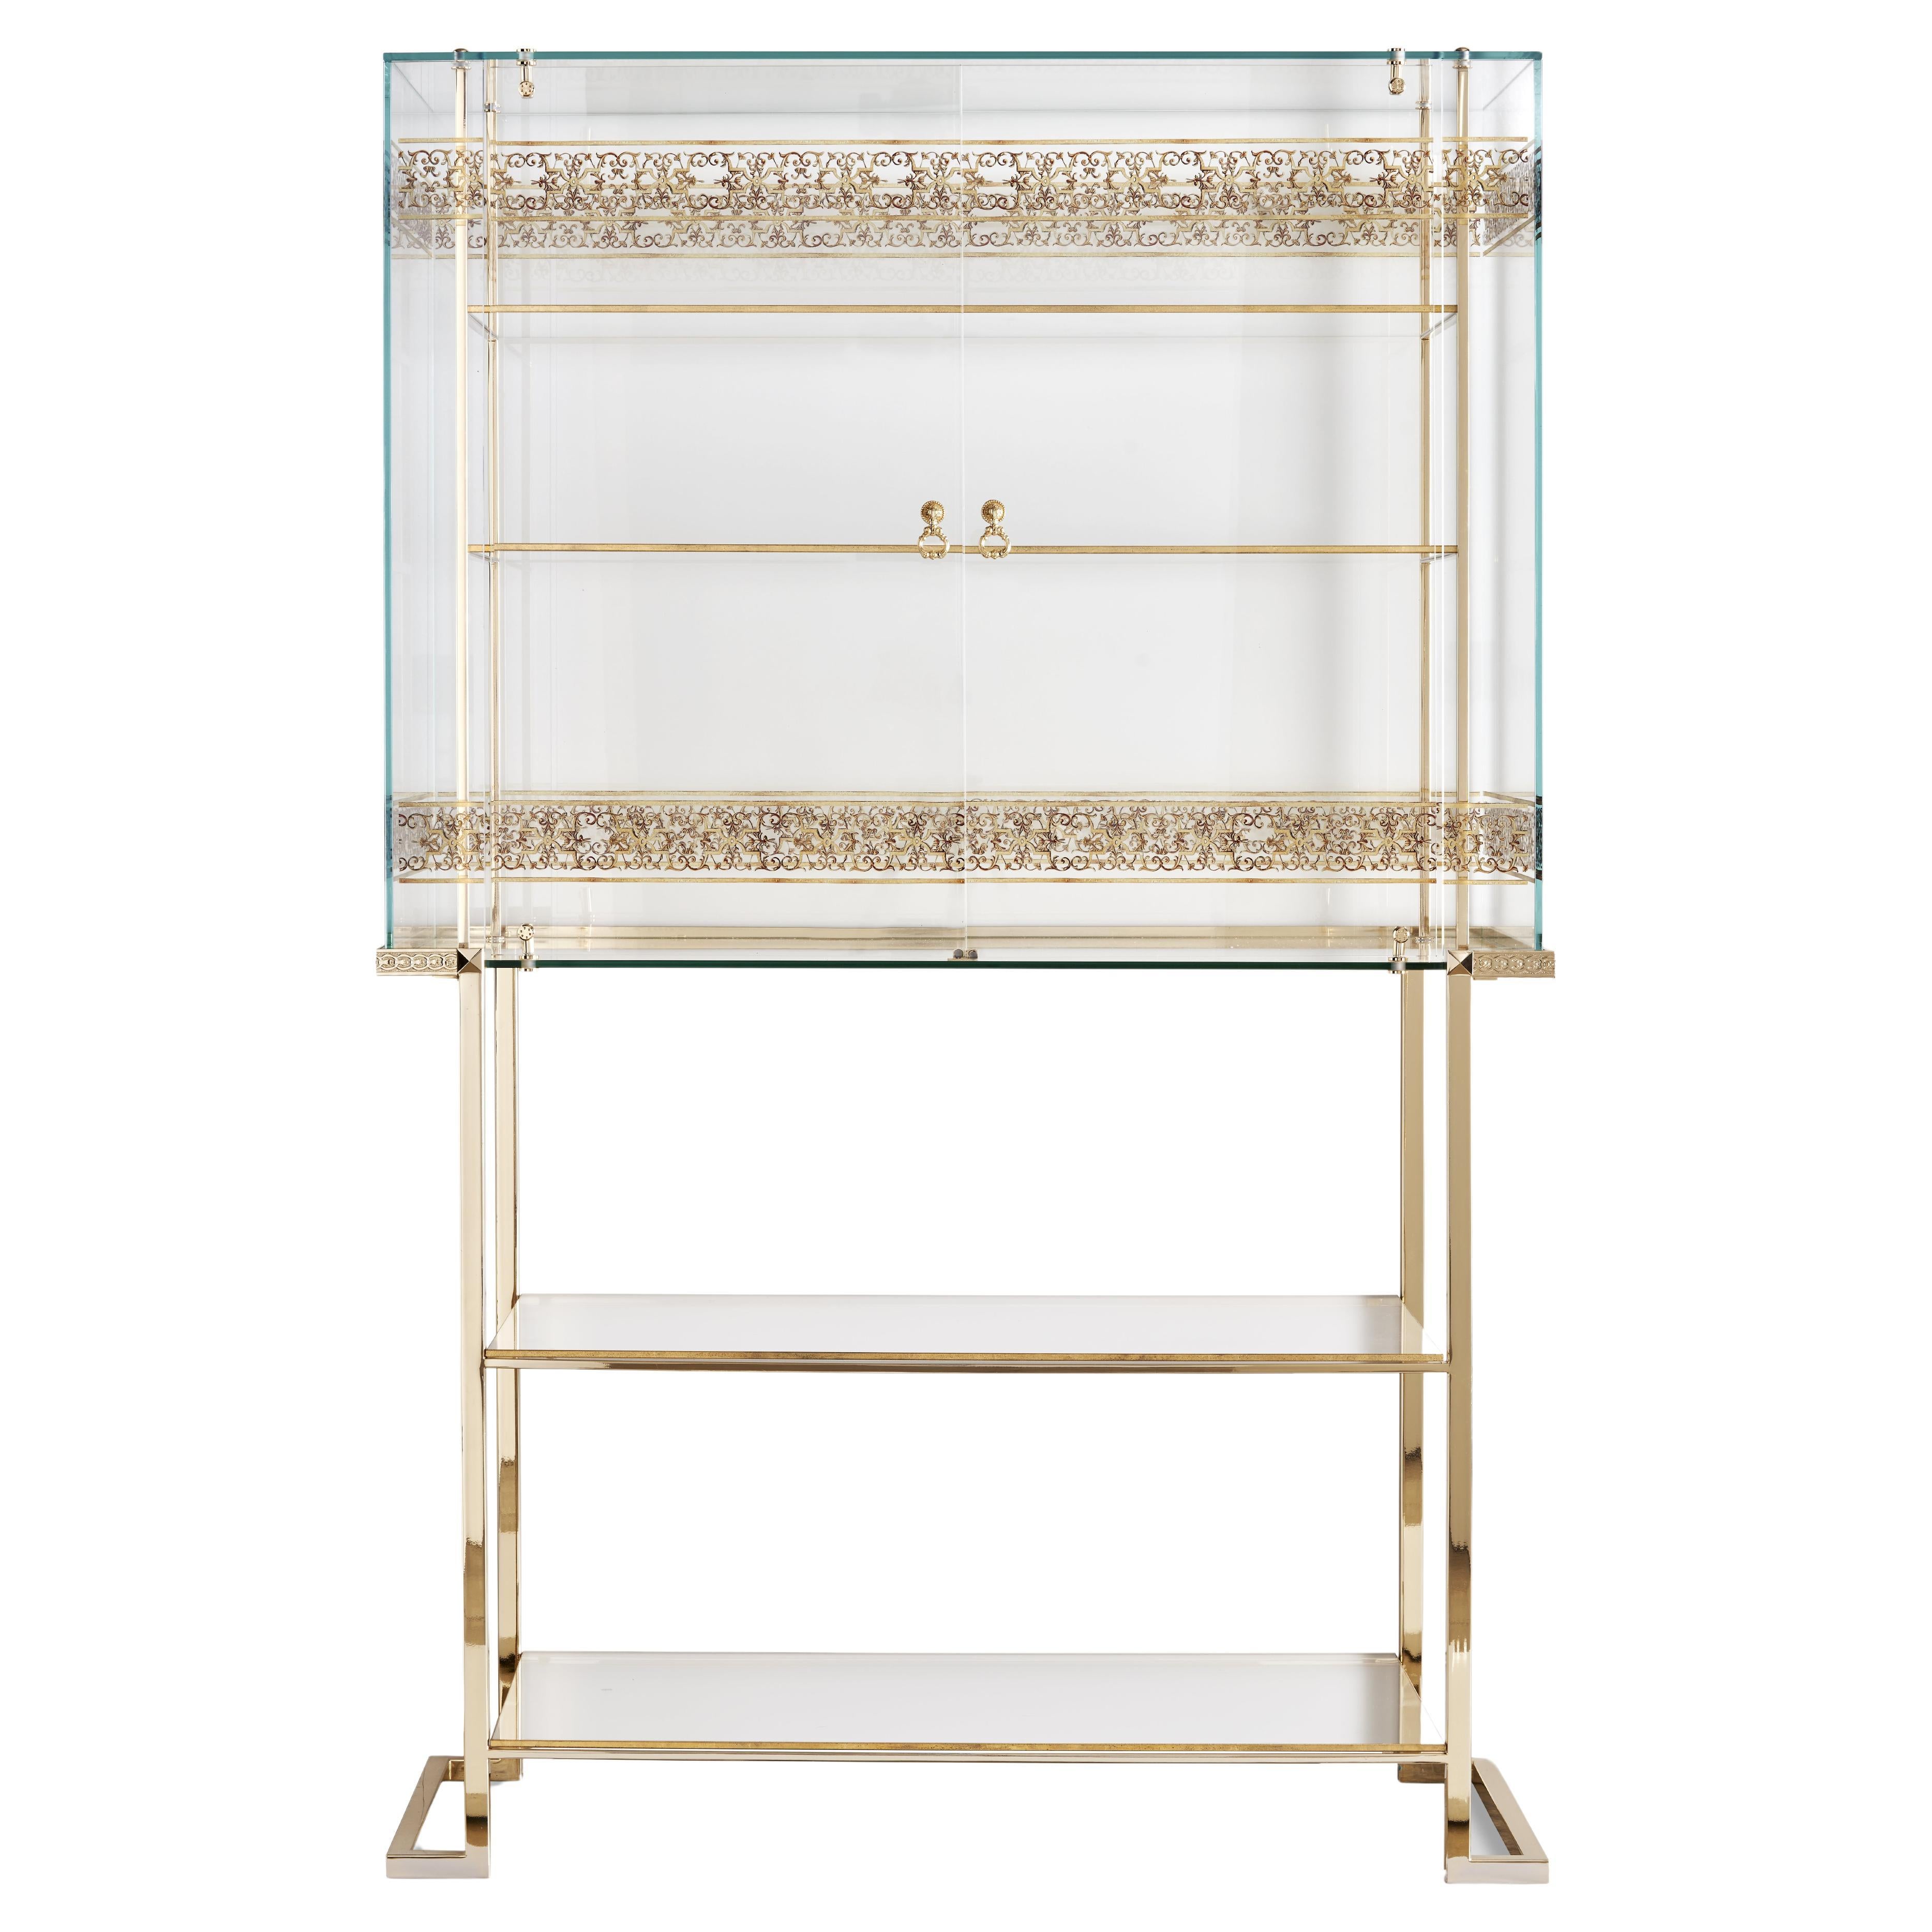 Neoclassical metal display case with gold24kt electroplating finish and decorated glass EL238 For Sale